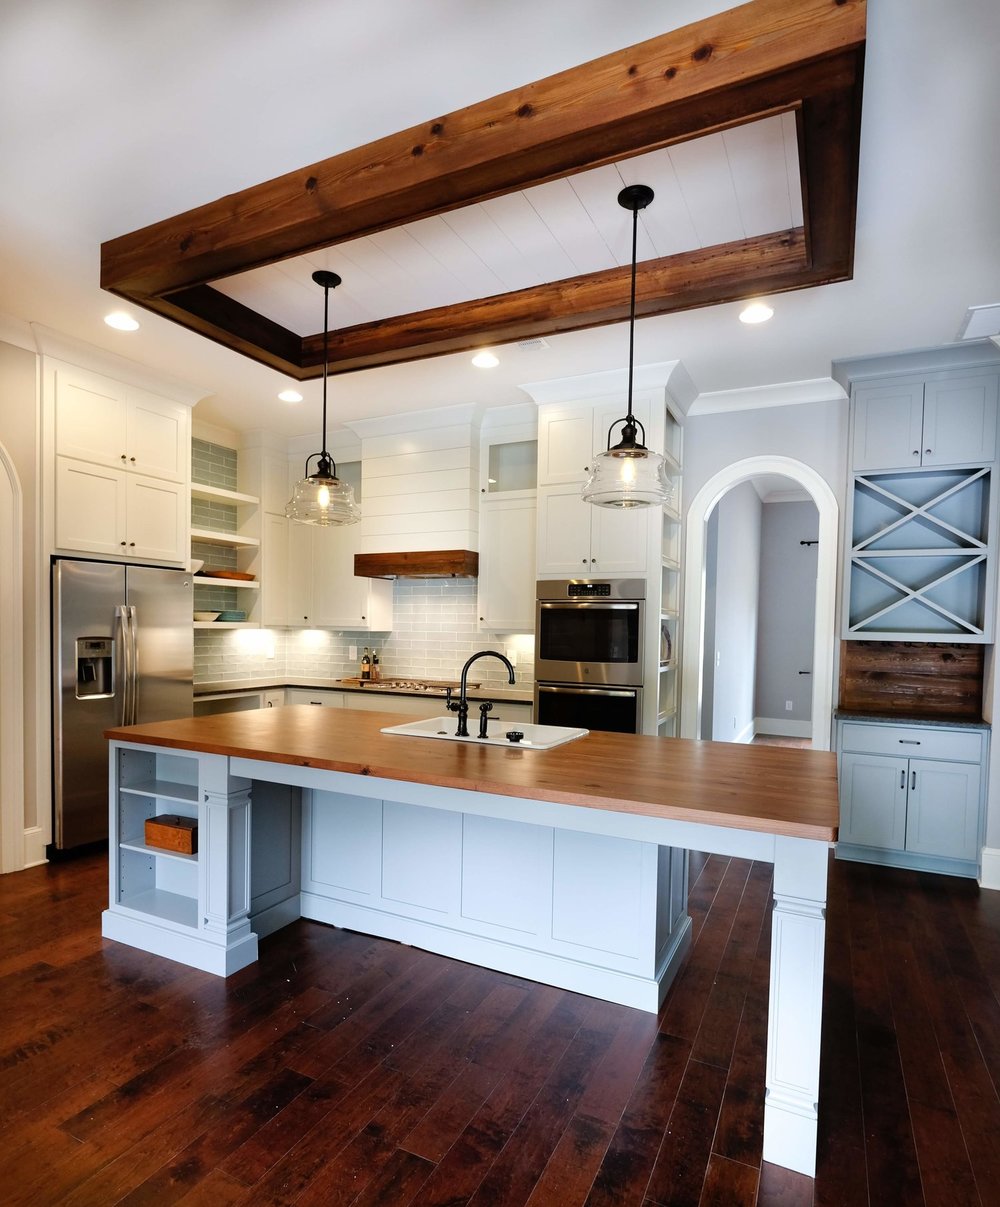 9 Ways To Add Wood Countertops Your, Wood Kitchen Island Countertop